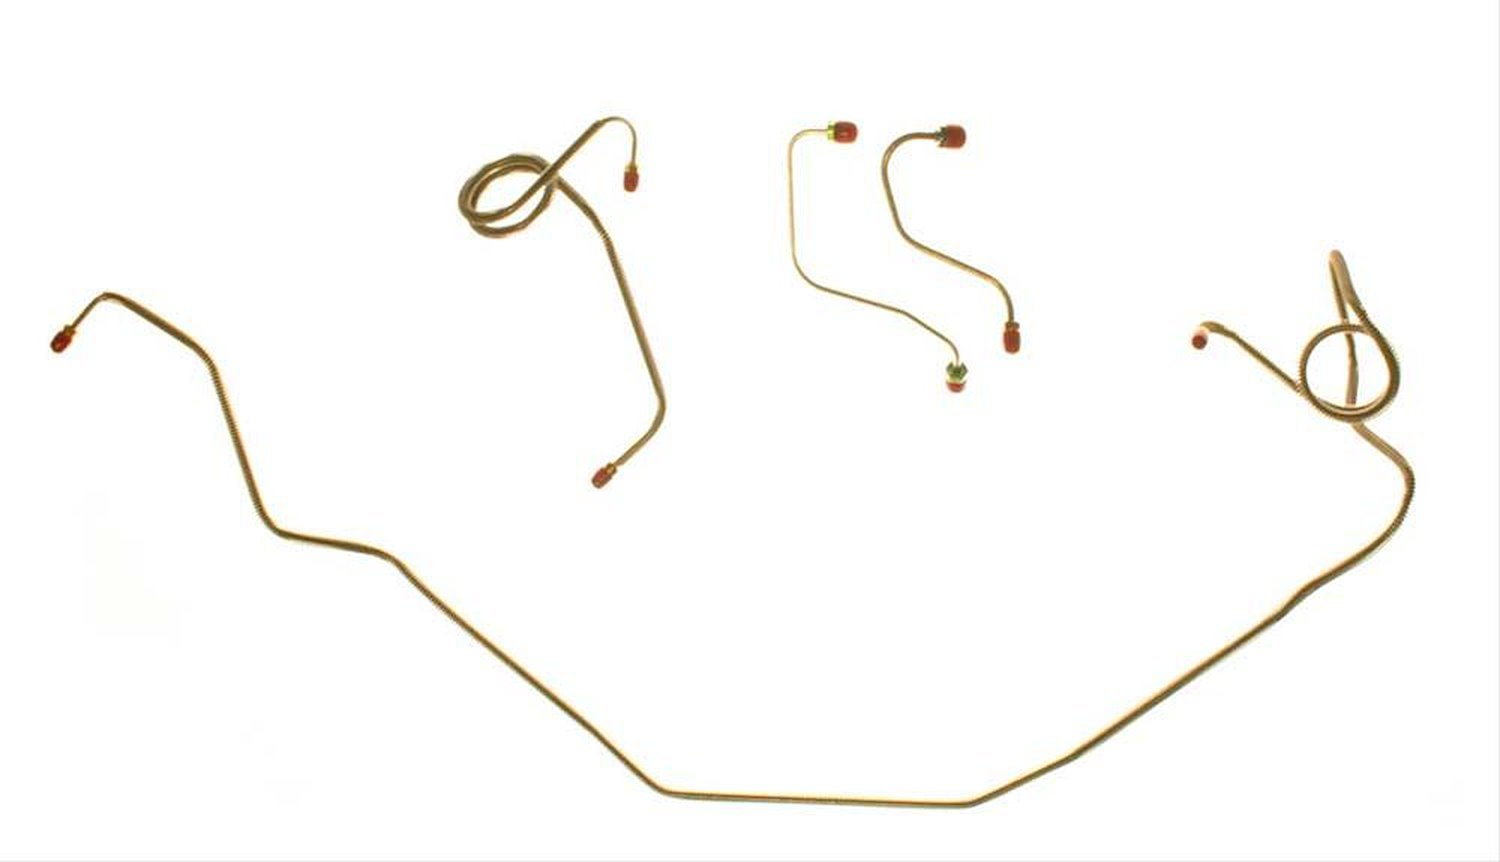 93 Chevy S-10 Blazer Rear Axle Brake Lines 2 Pcs. Stainless